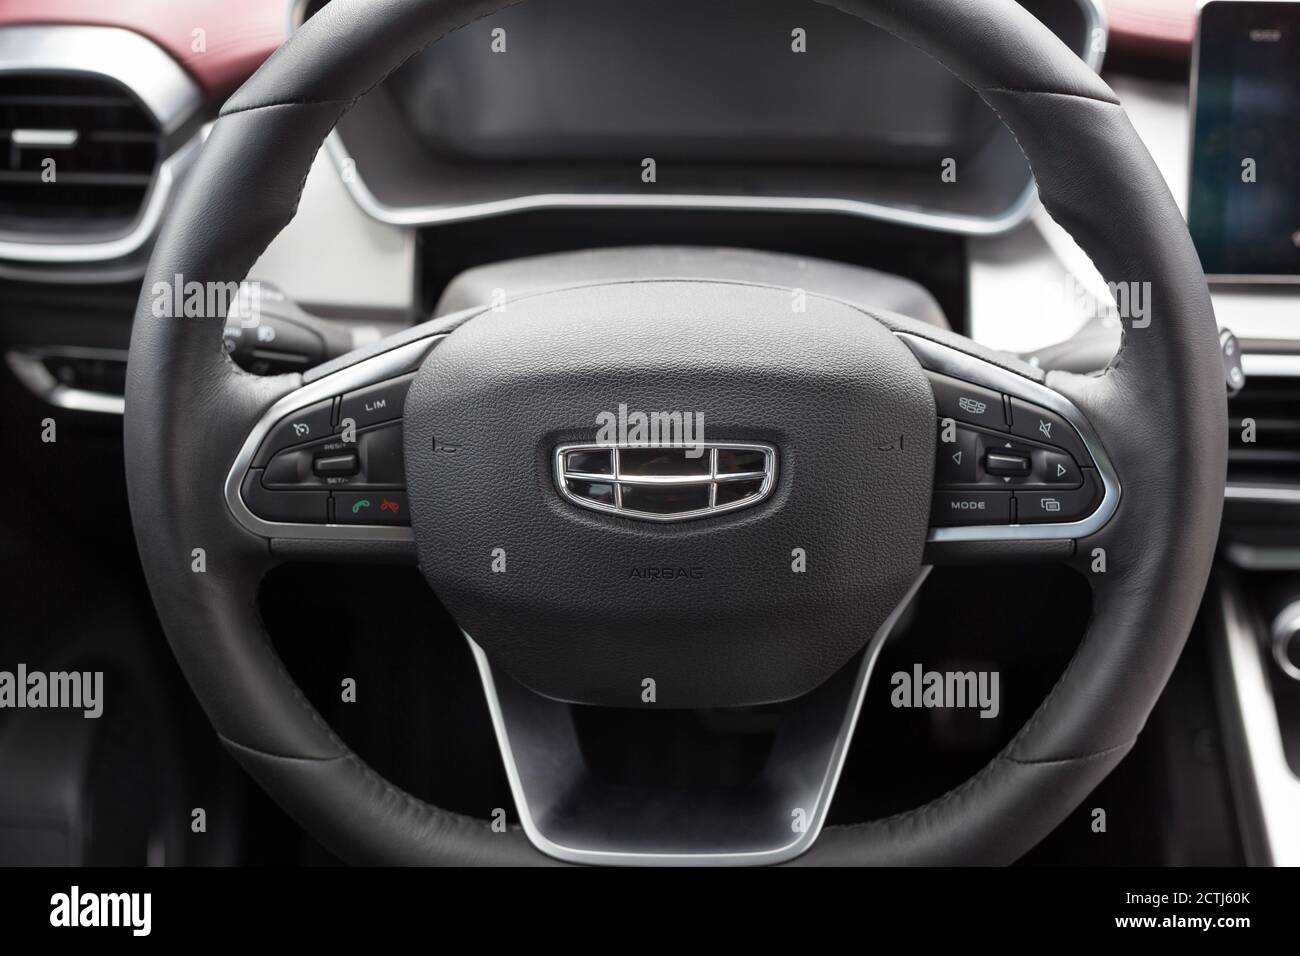 Russia, Izhevsk - August 14, 2020: Geely showroom. Steering wheel of new CoolRay car with leather cover. Car manufacturer from China Stock Photo